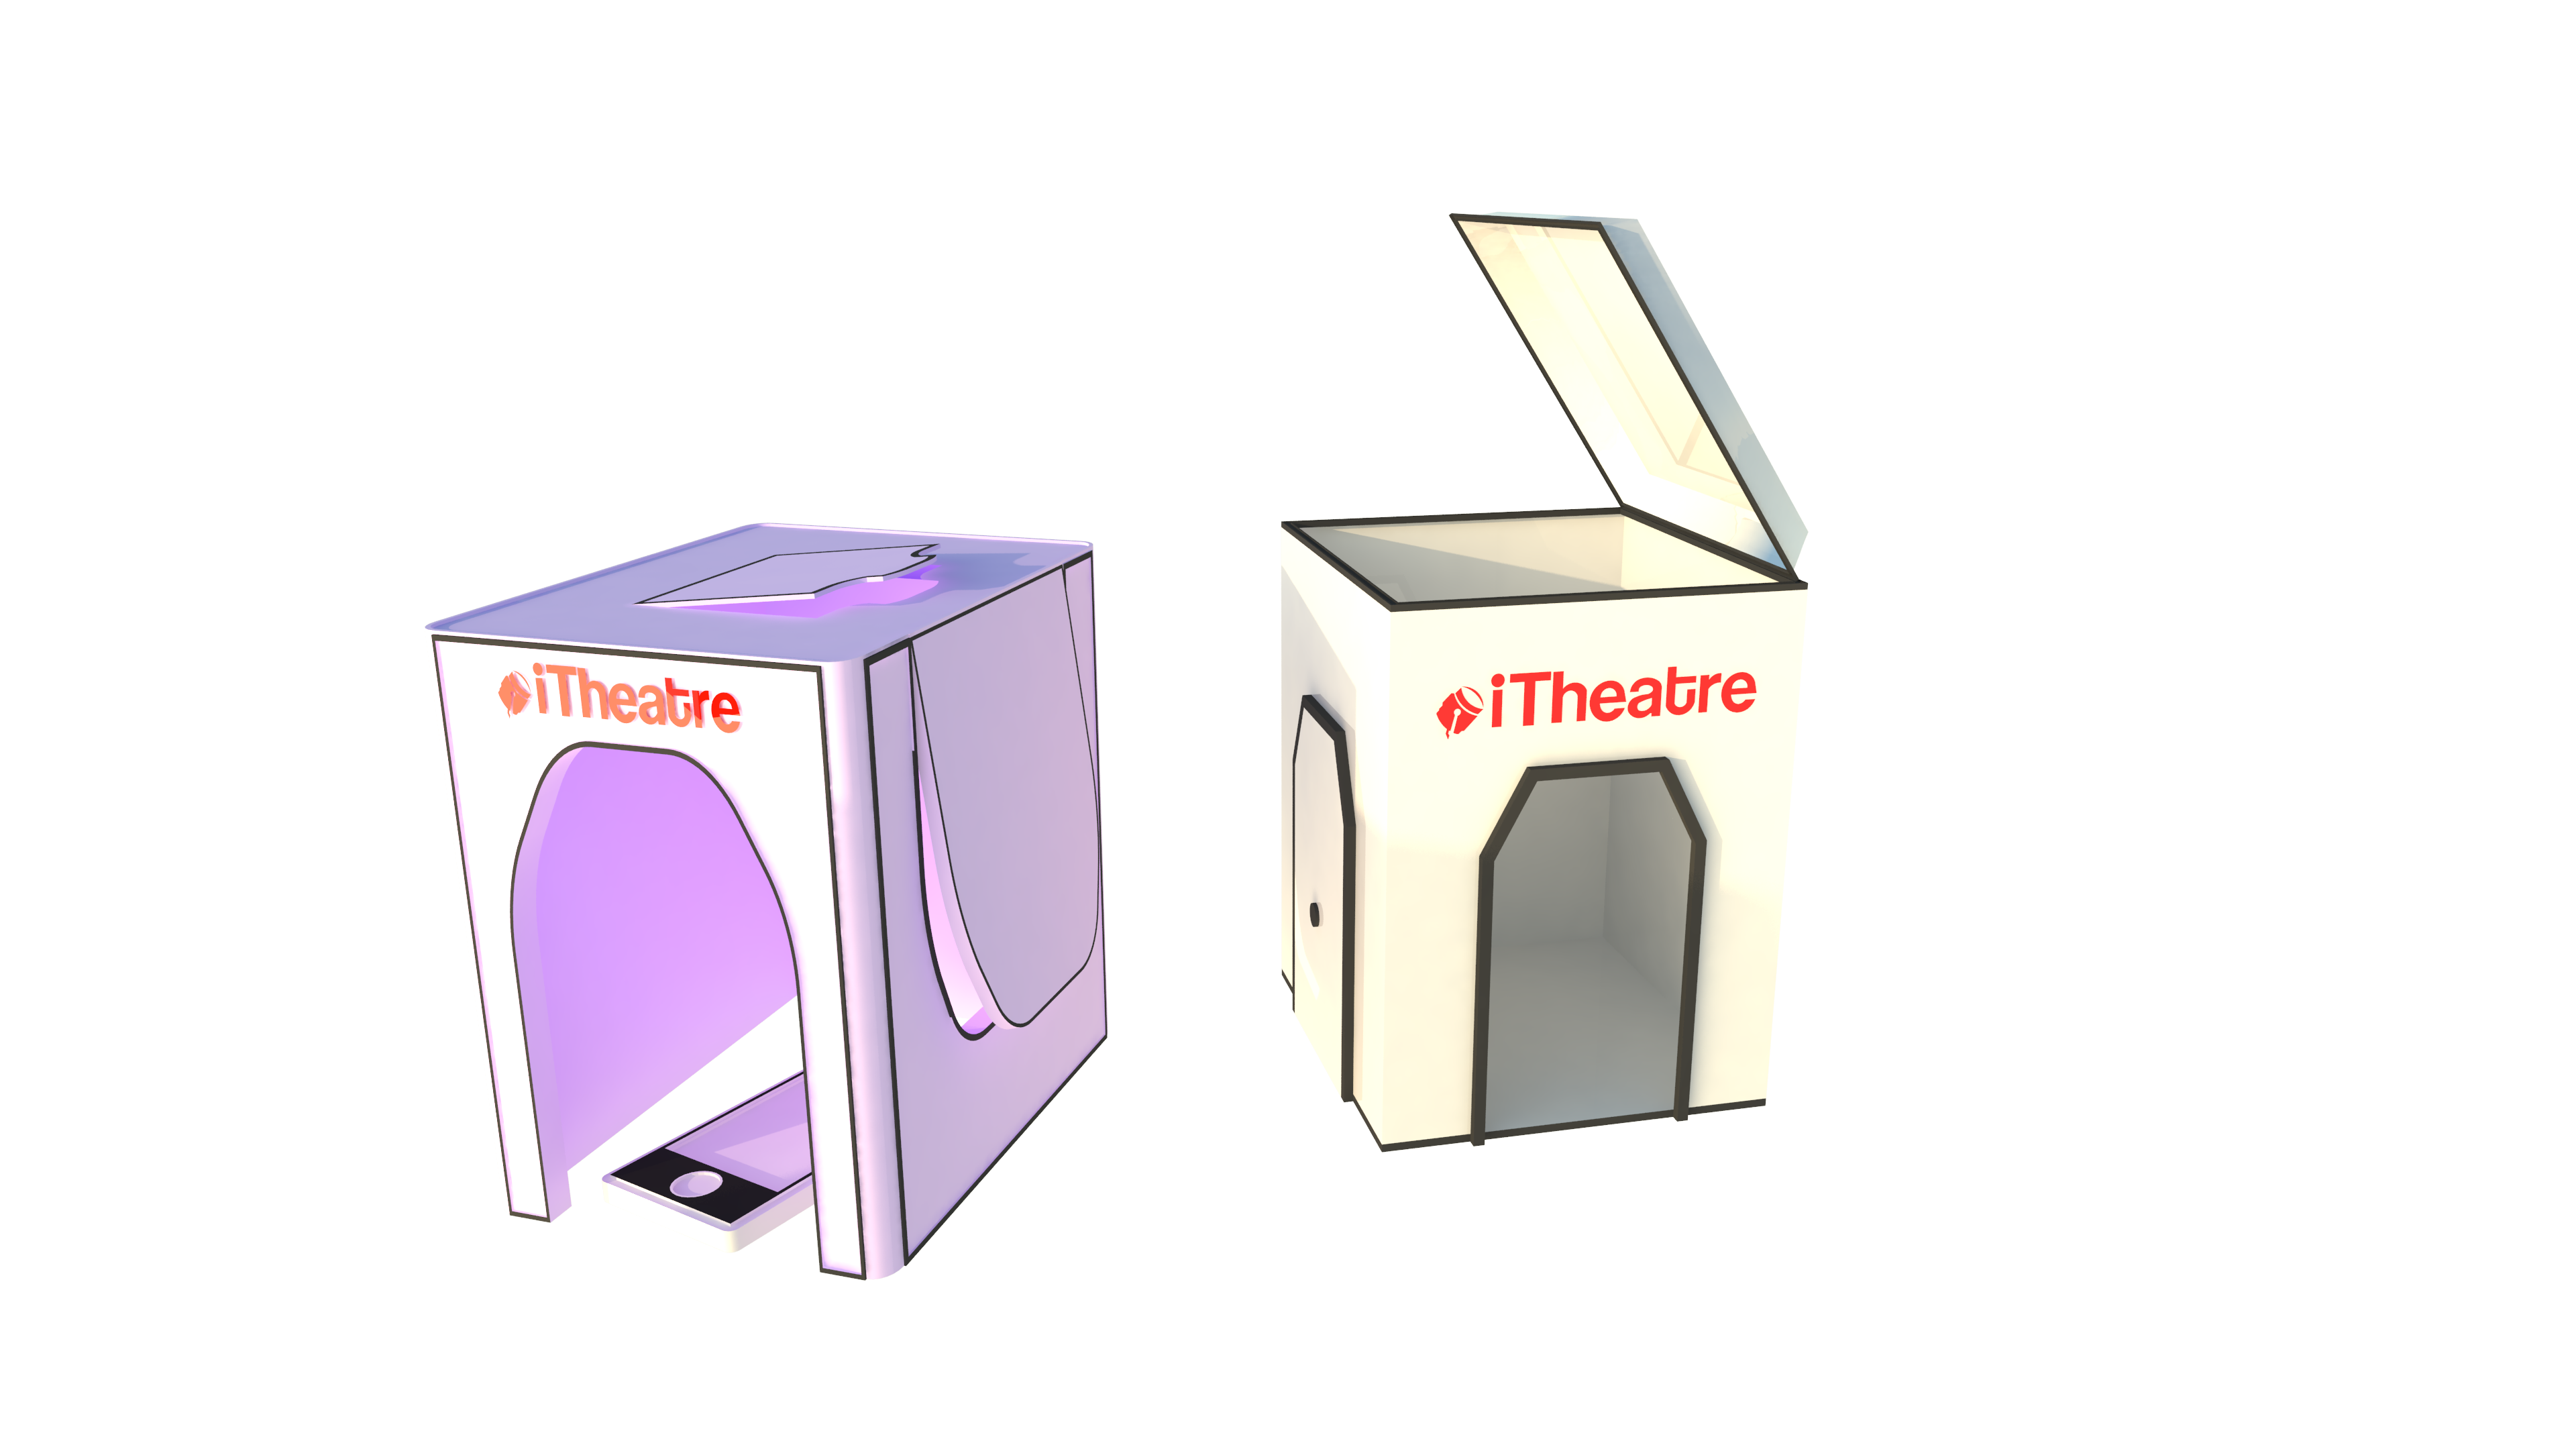 The iTheatre is an entertainment invention which will provide a more comfortable and overall better viewing experience when watching videos on a mobile device.